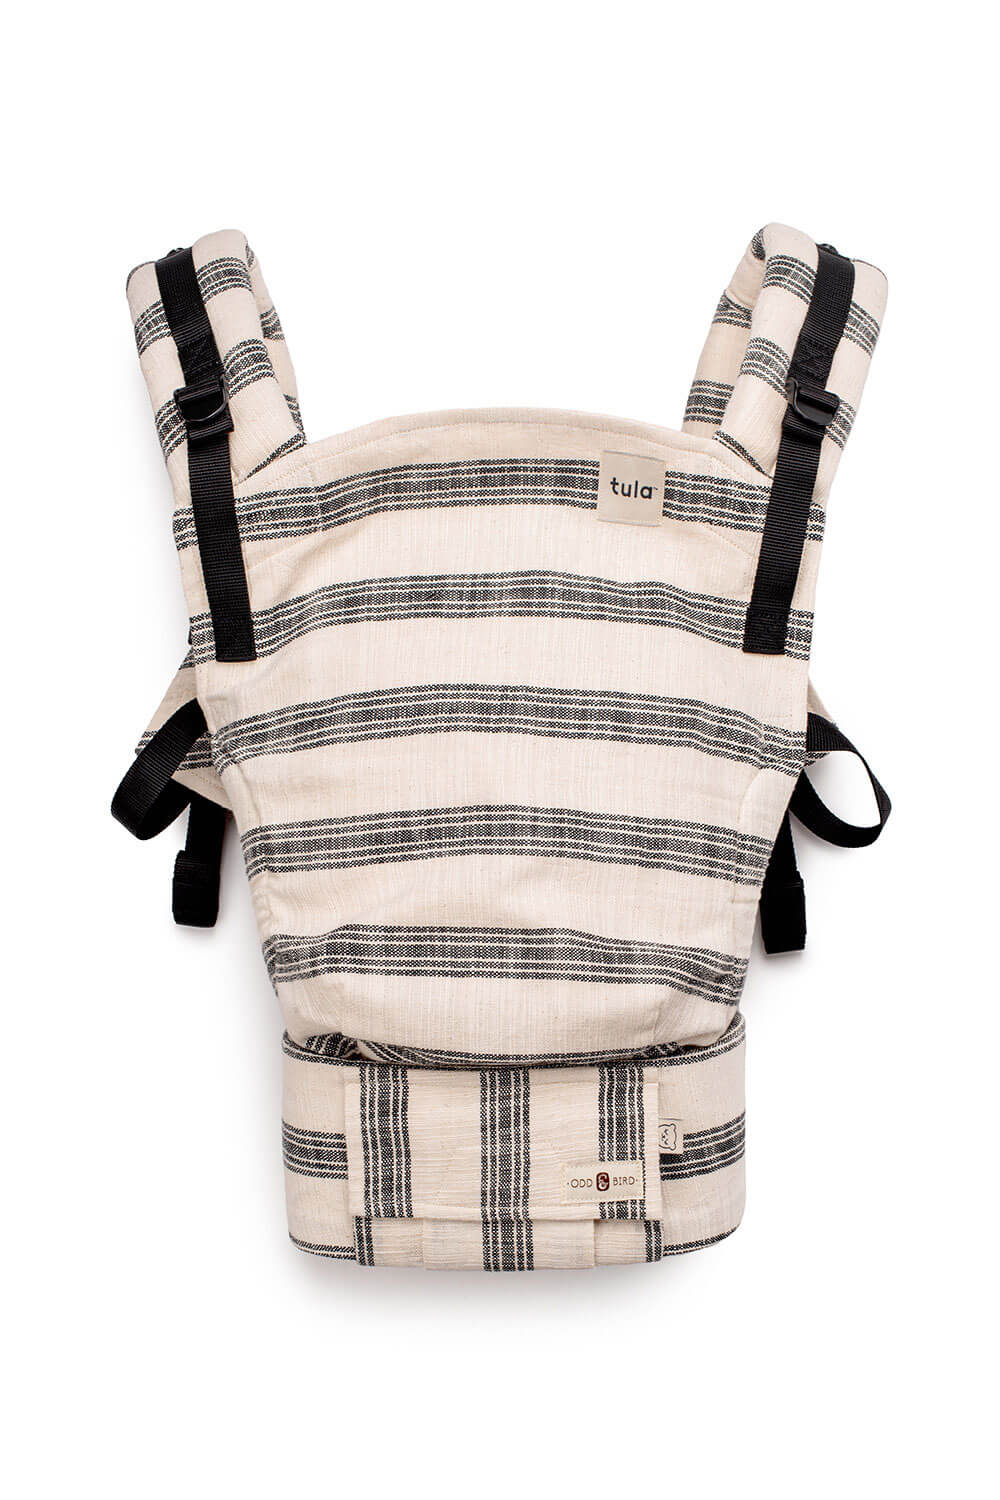 Sultan - Signature Woven Free-to-Grow Baby Carrier